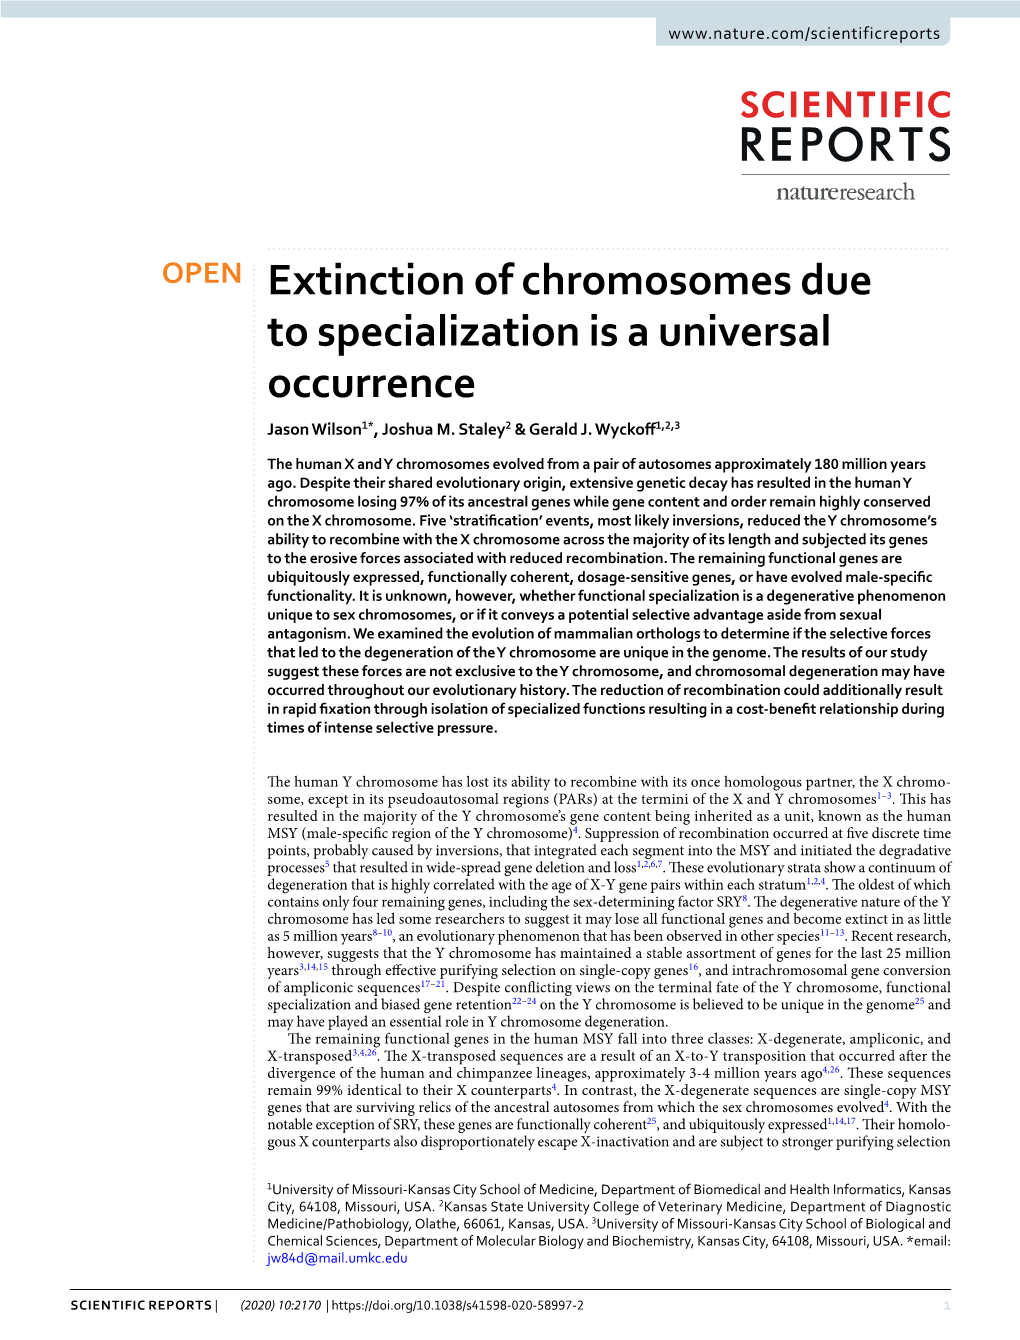 Extinction of Chromosomes Due to Specialization Is a Universal Occurrence Jason Wilson1*, Joshua M